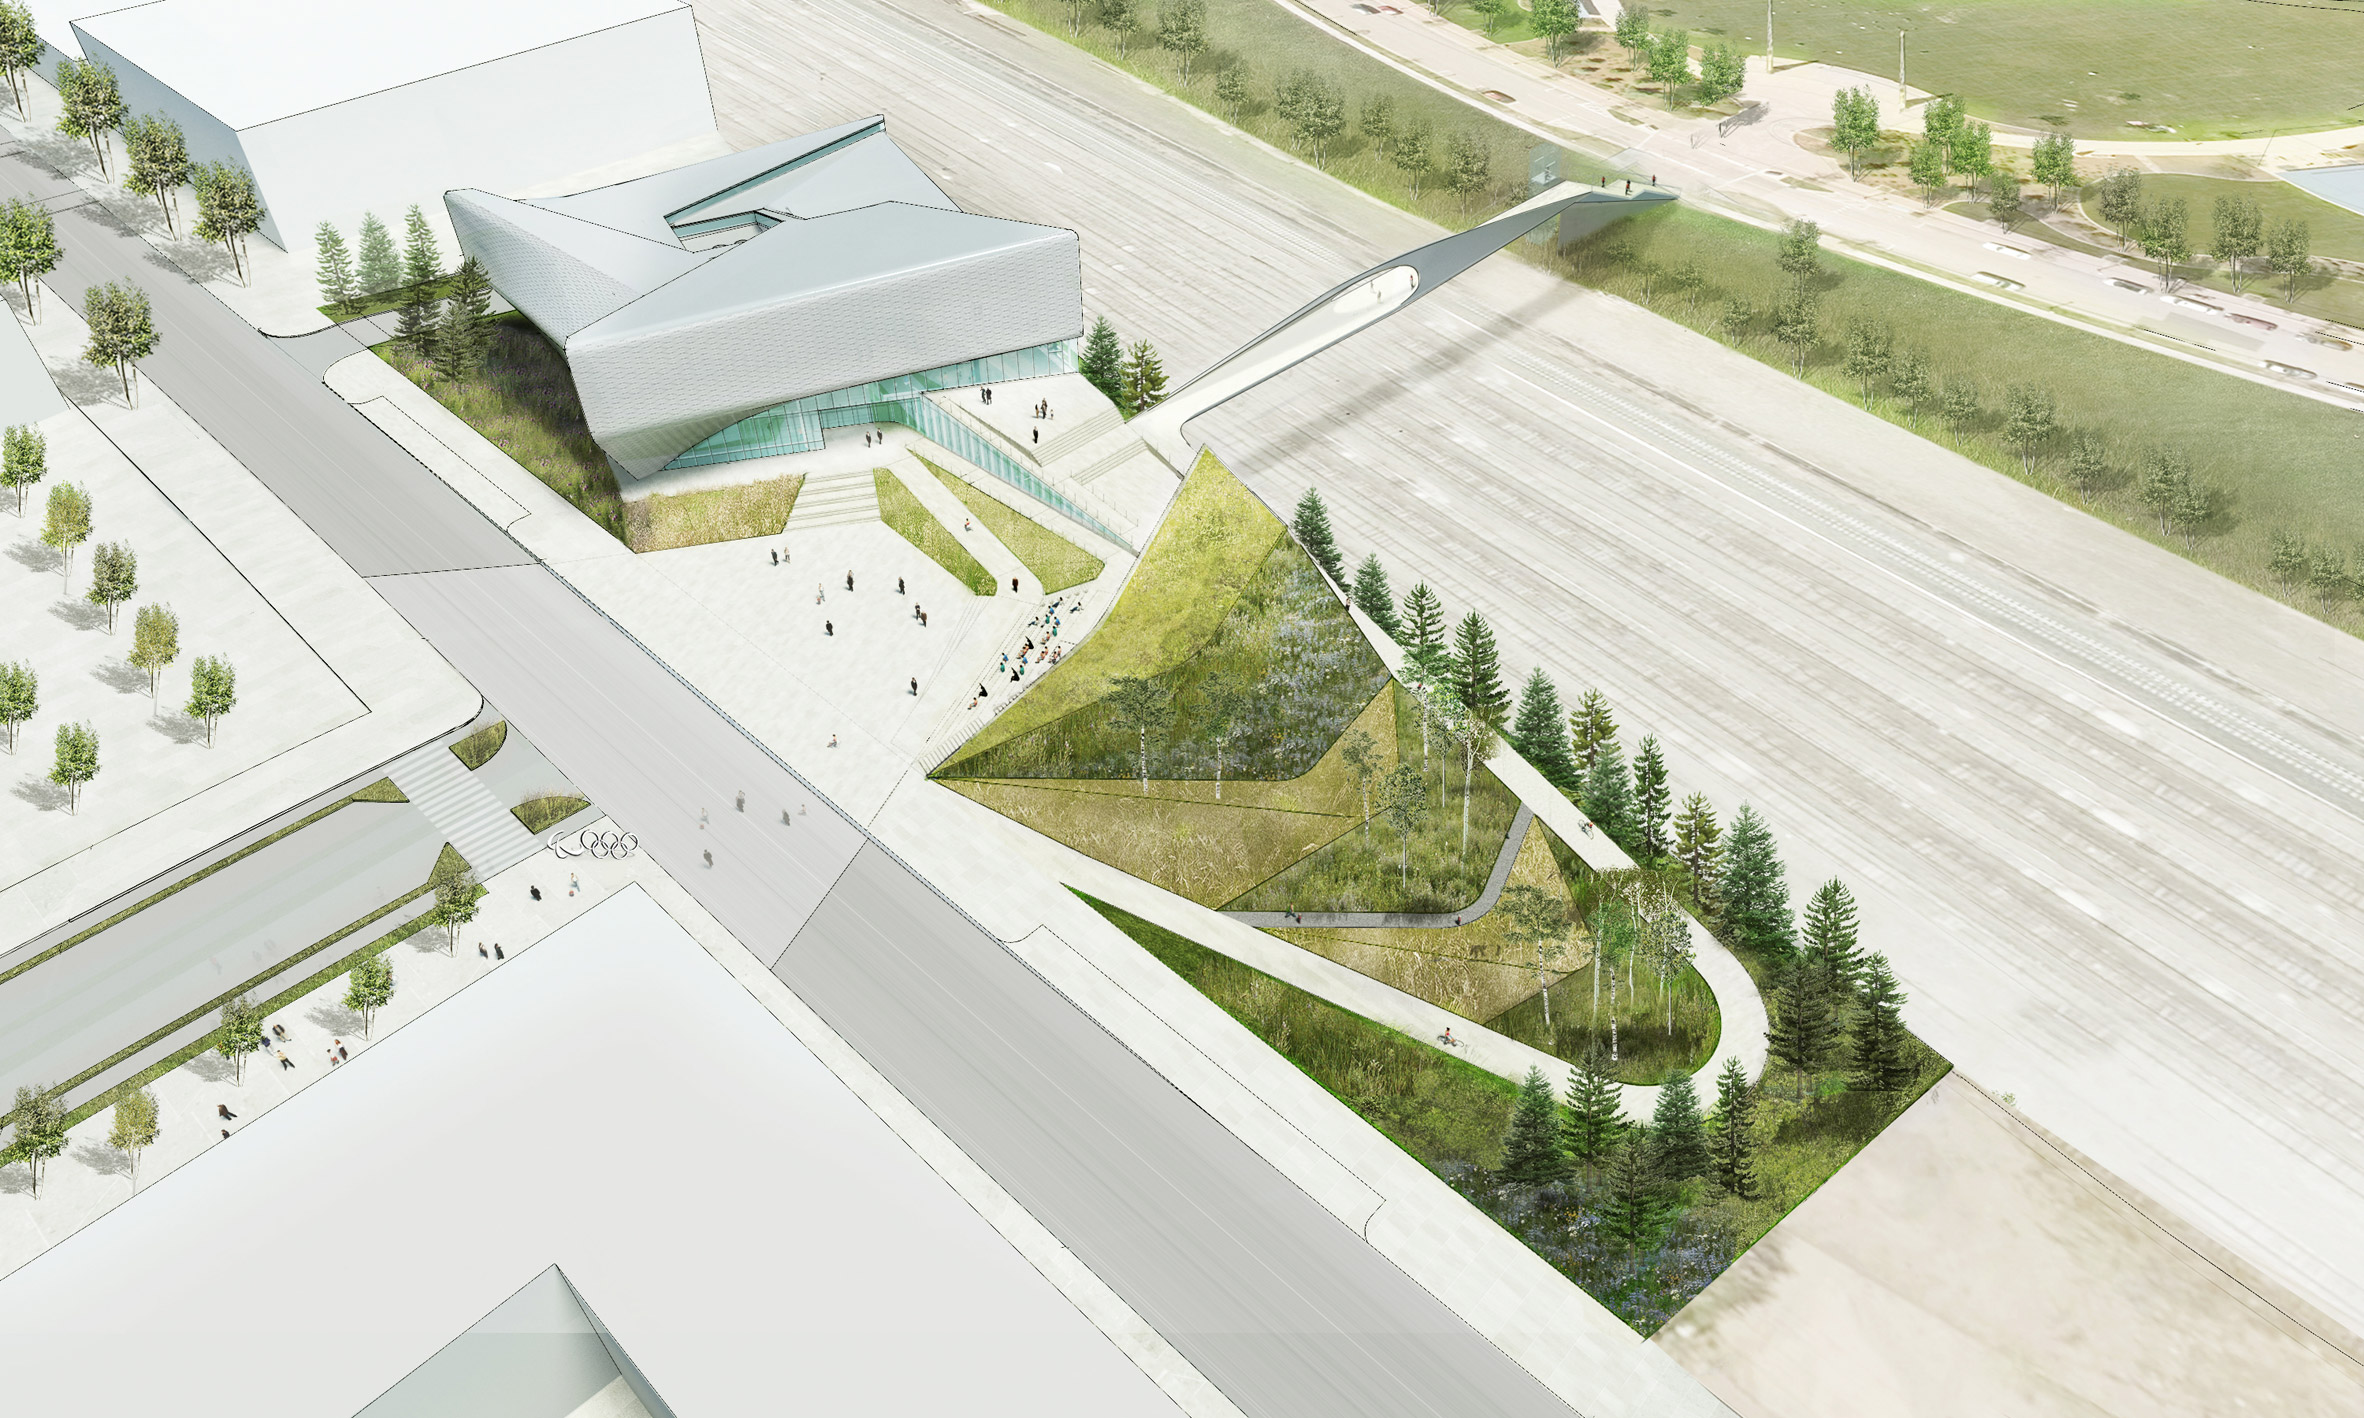 US Olympic Museum by Diller, Scofido + Renfro